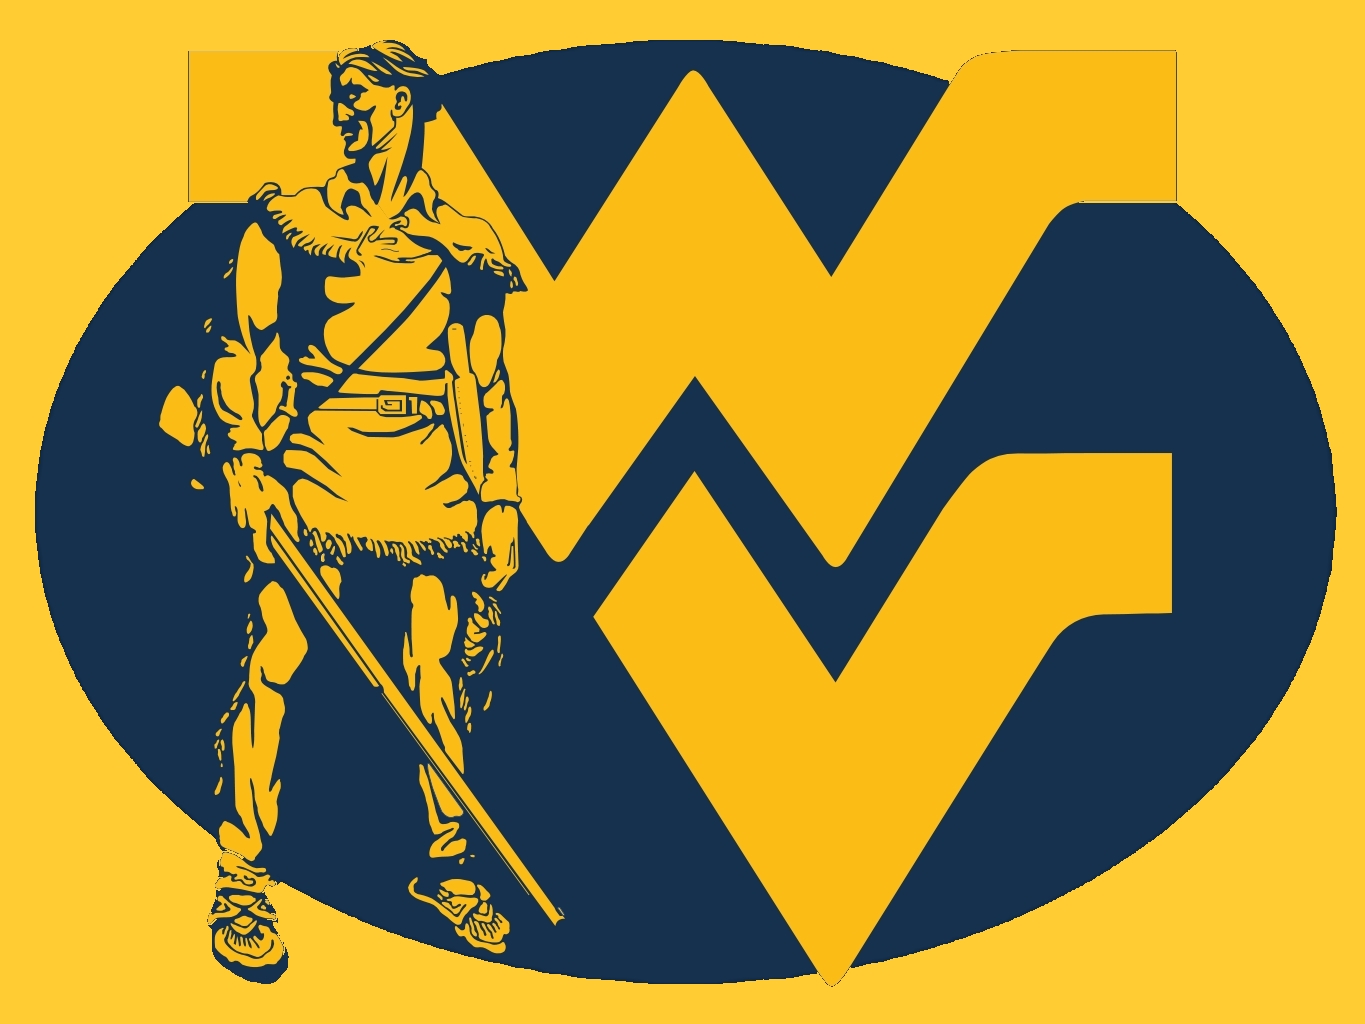 Are Always Is The Official Motto Of State West Virginia